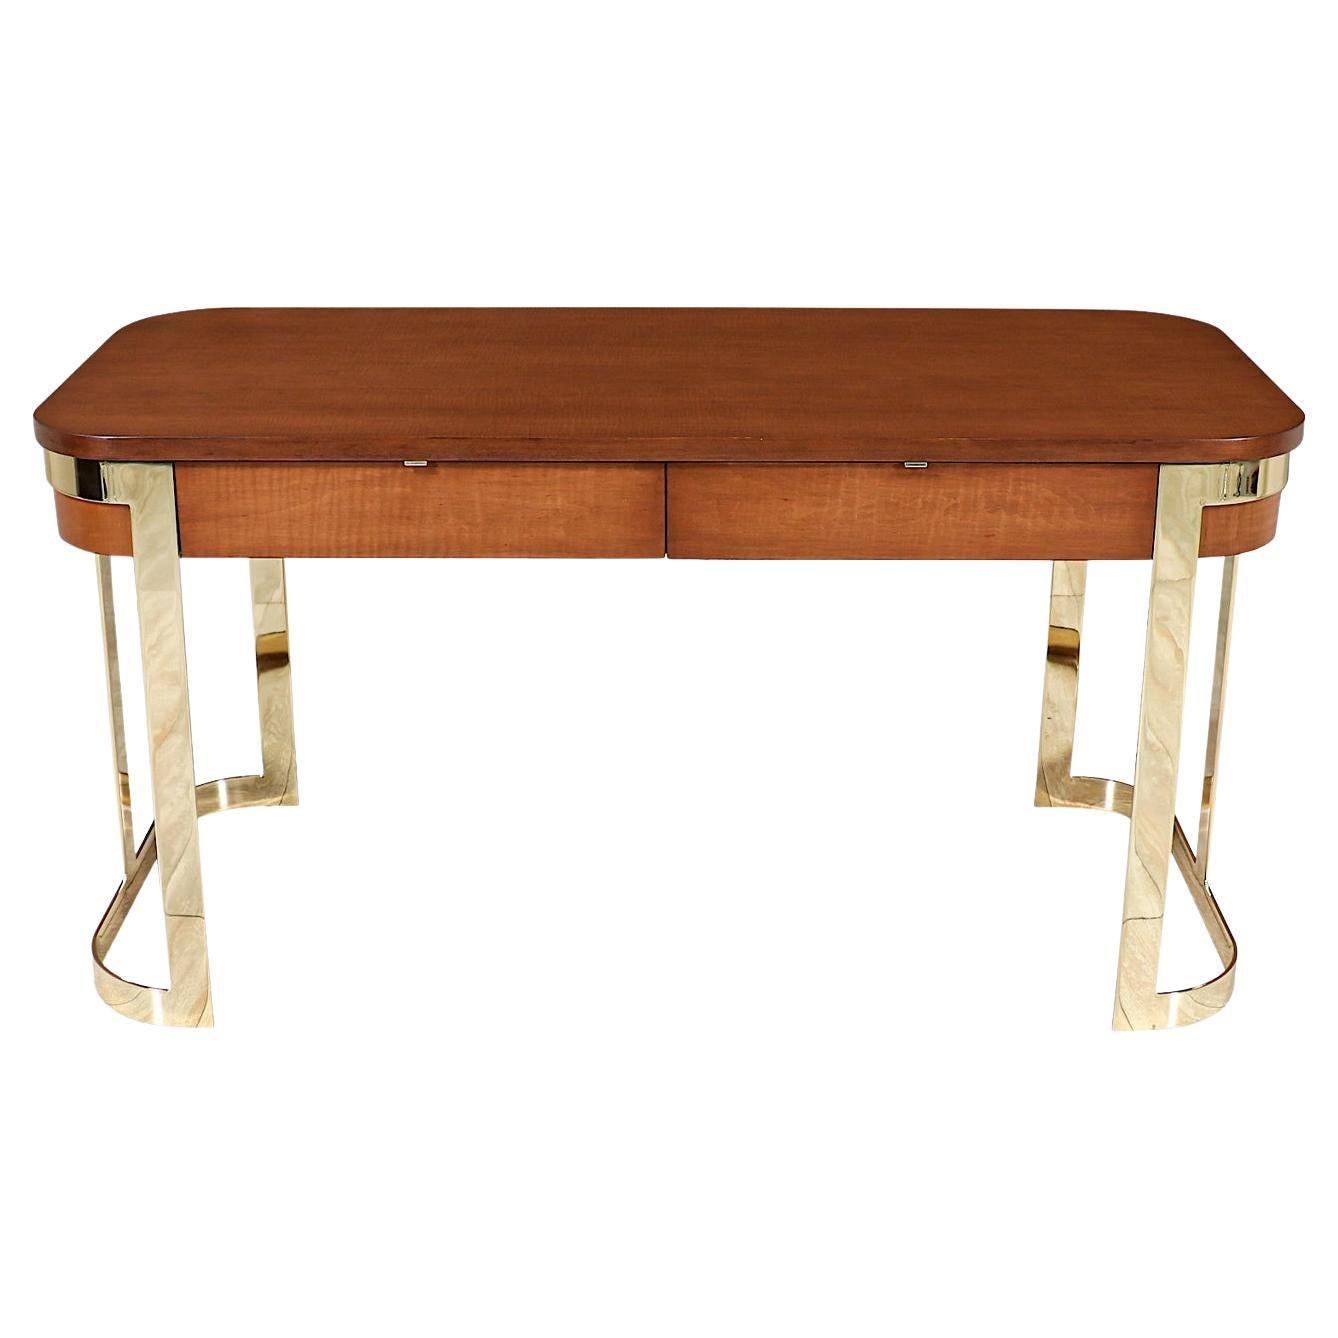 Expertly Restored - Mid-Century Modern Floating-Top Desk with Brass Accent